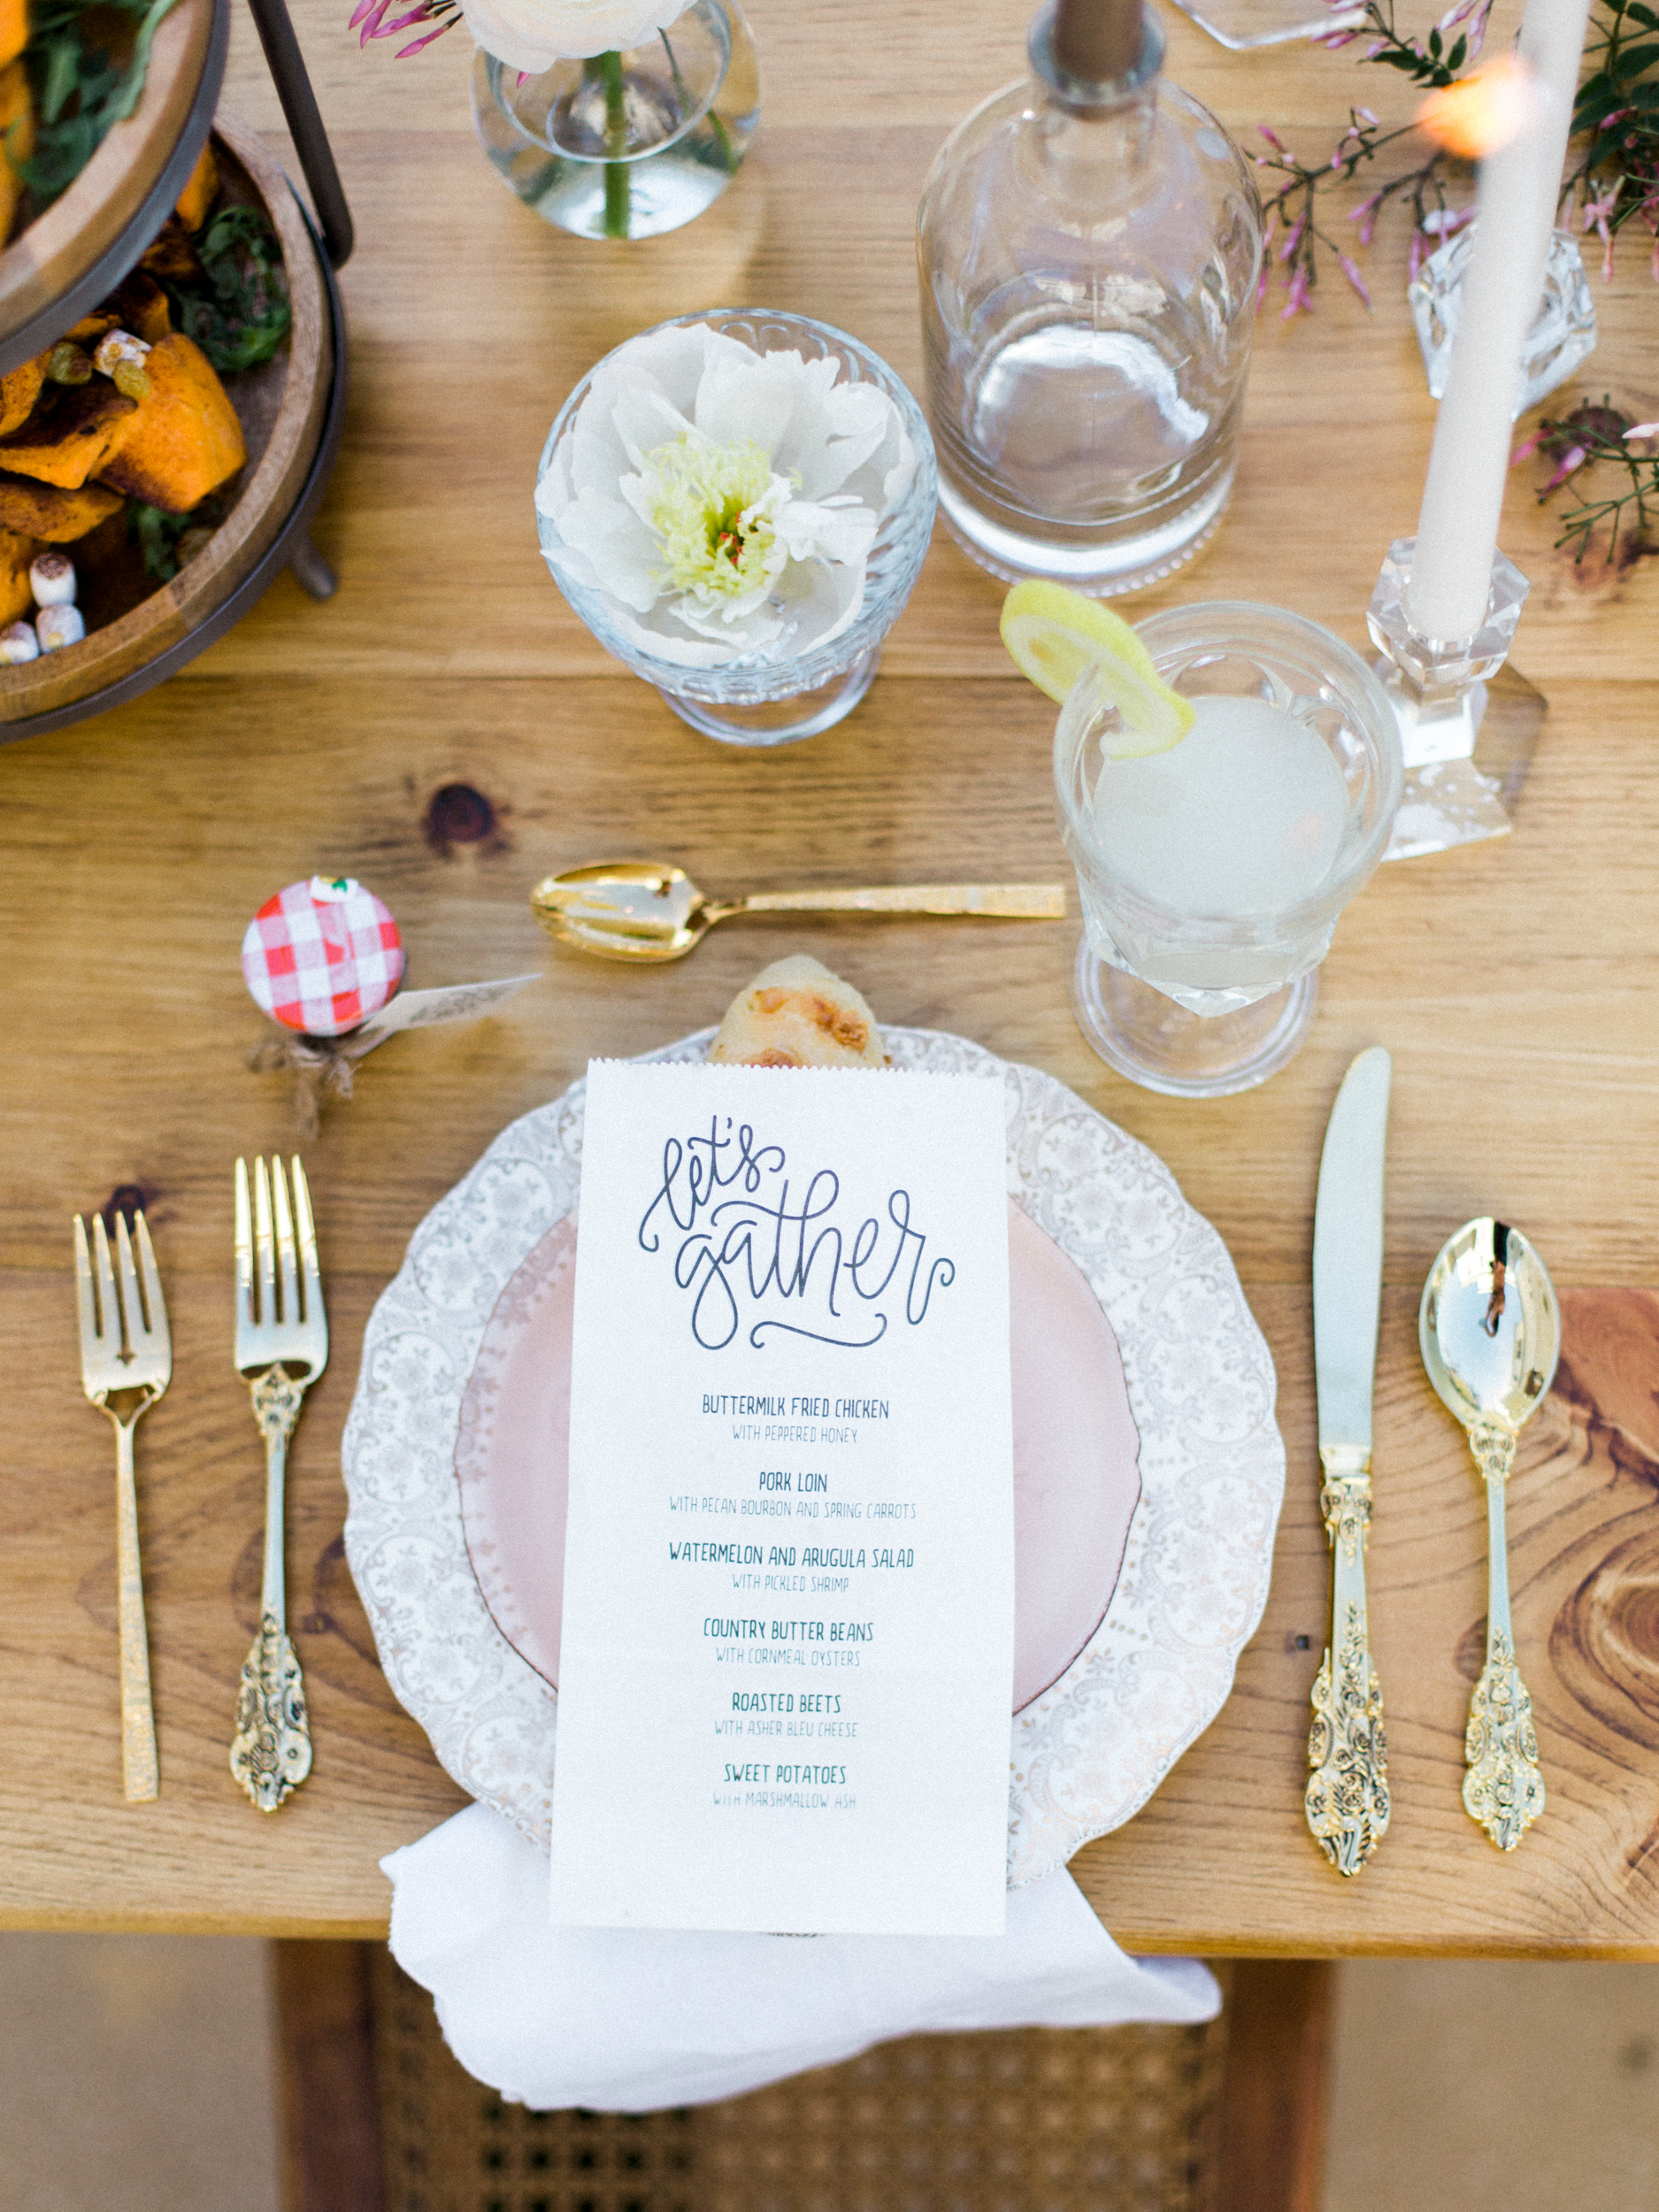 Outdoor Styled Southern Dinner Party - Behind-the-Scenes of a Styled Shoot